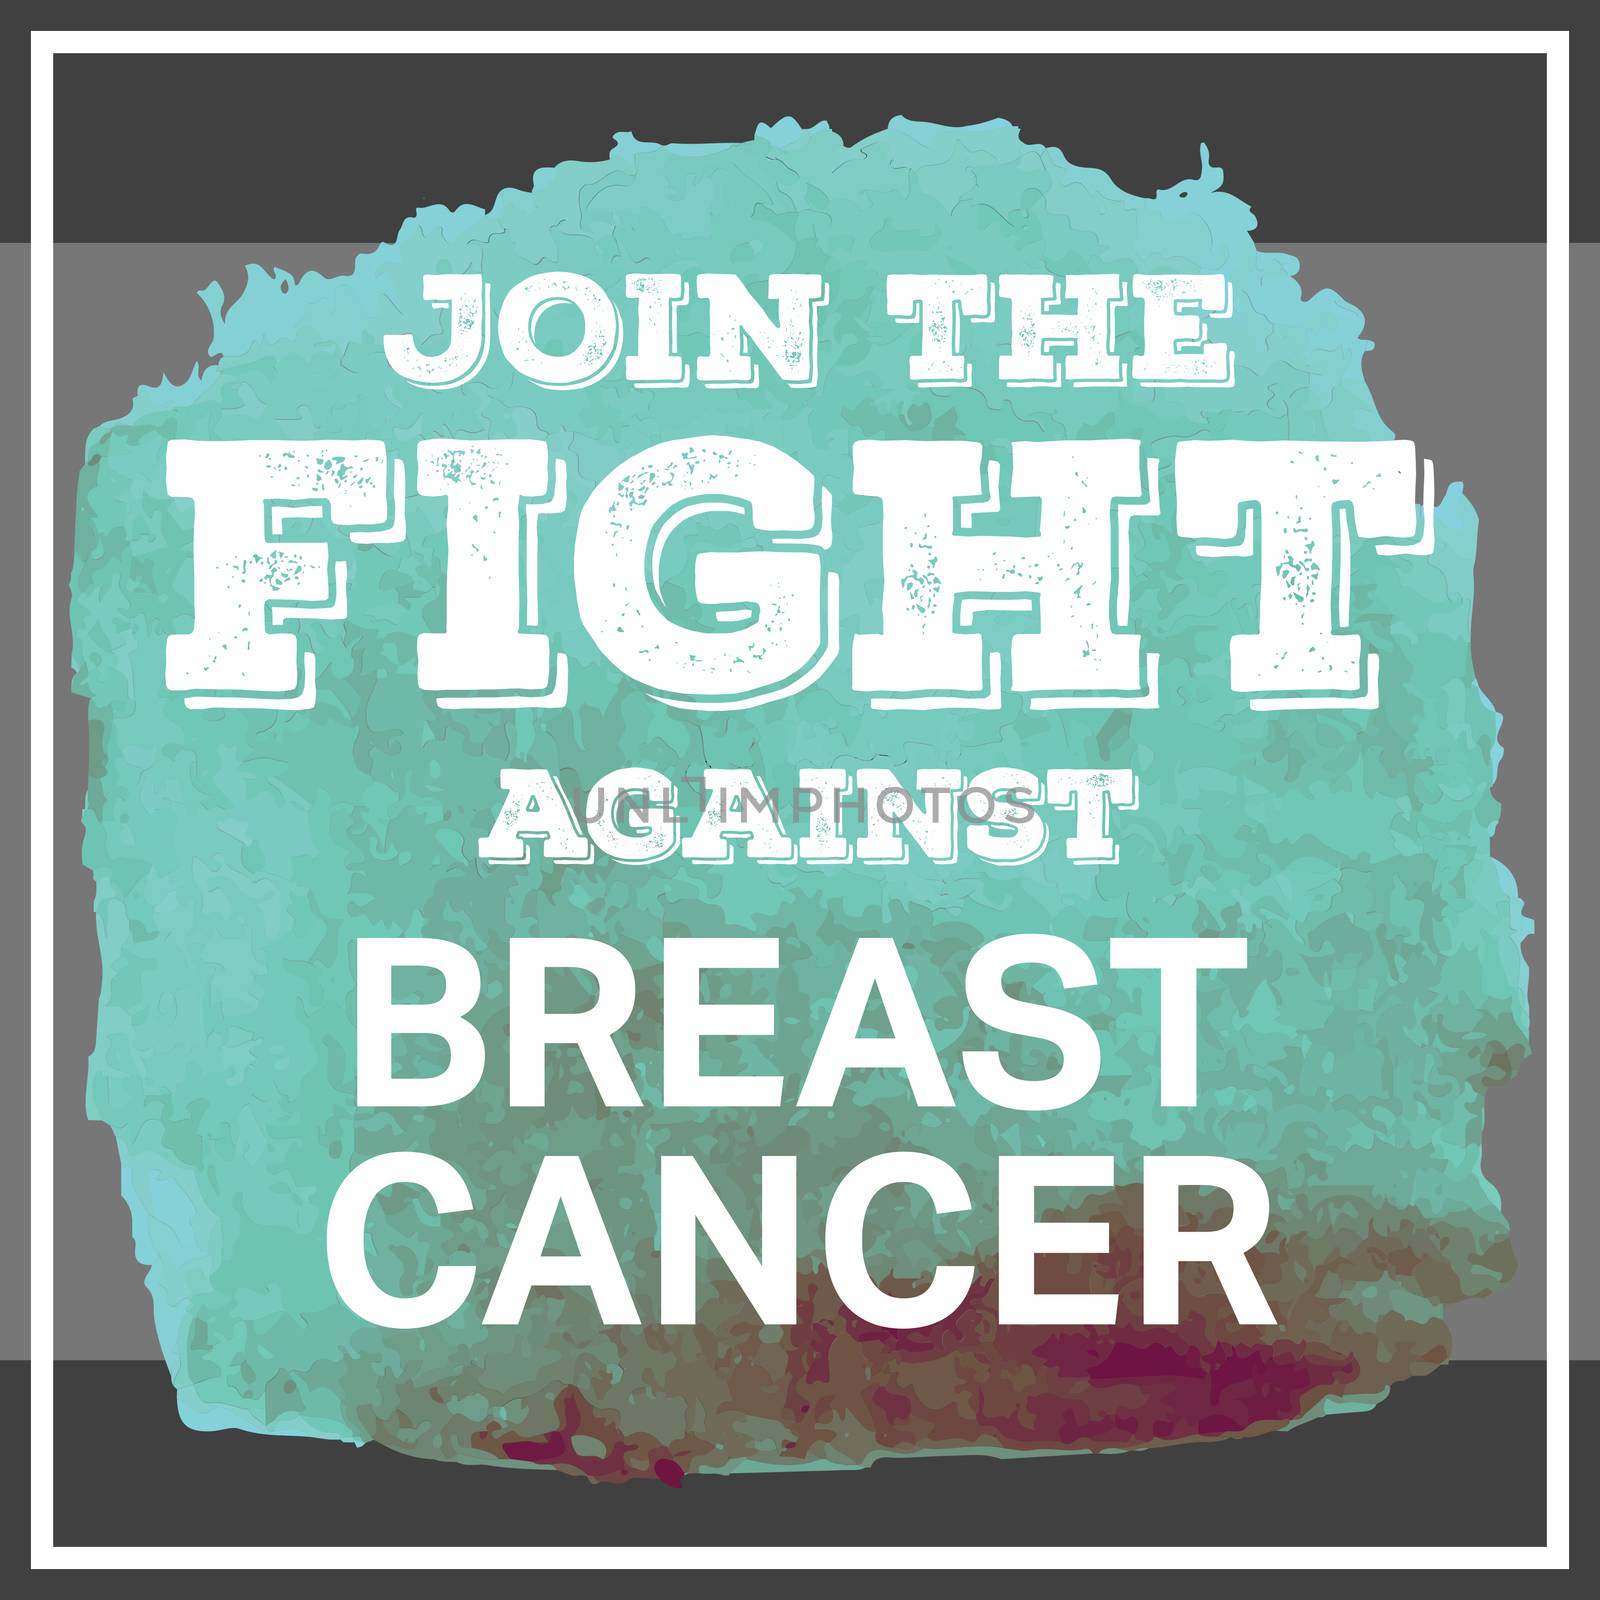 Composite image of breast cancer awareness message by Wavebreakmedia